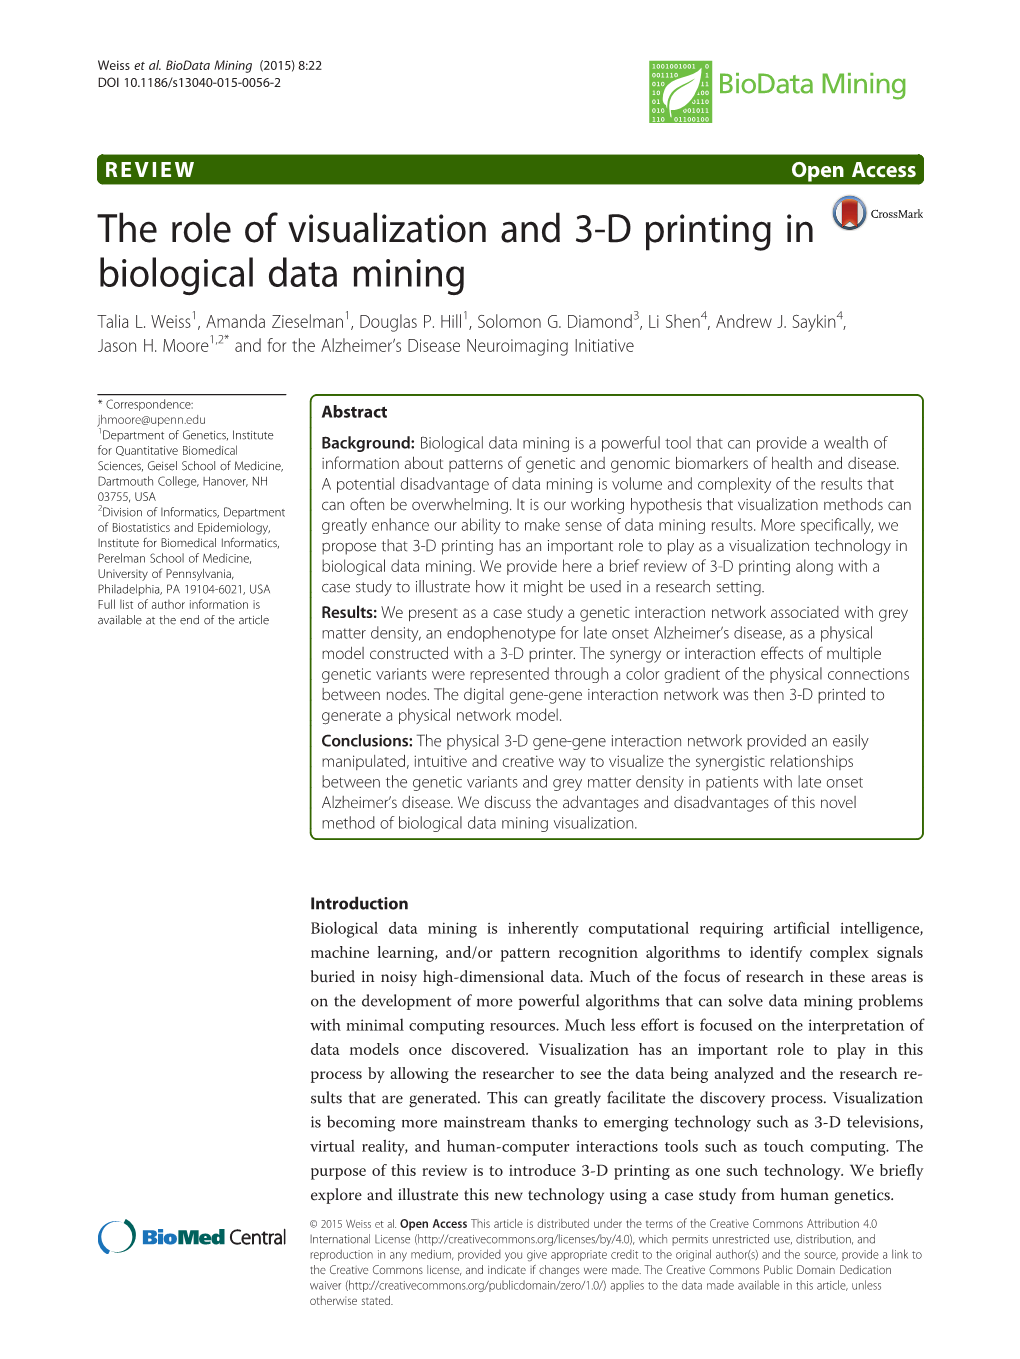 The Role of Visualization and 3-D Printing in Biological Data Mining Talia L